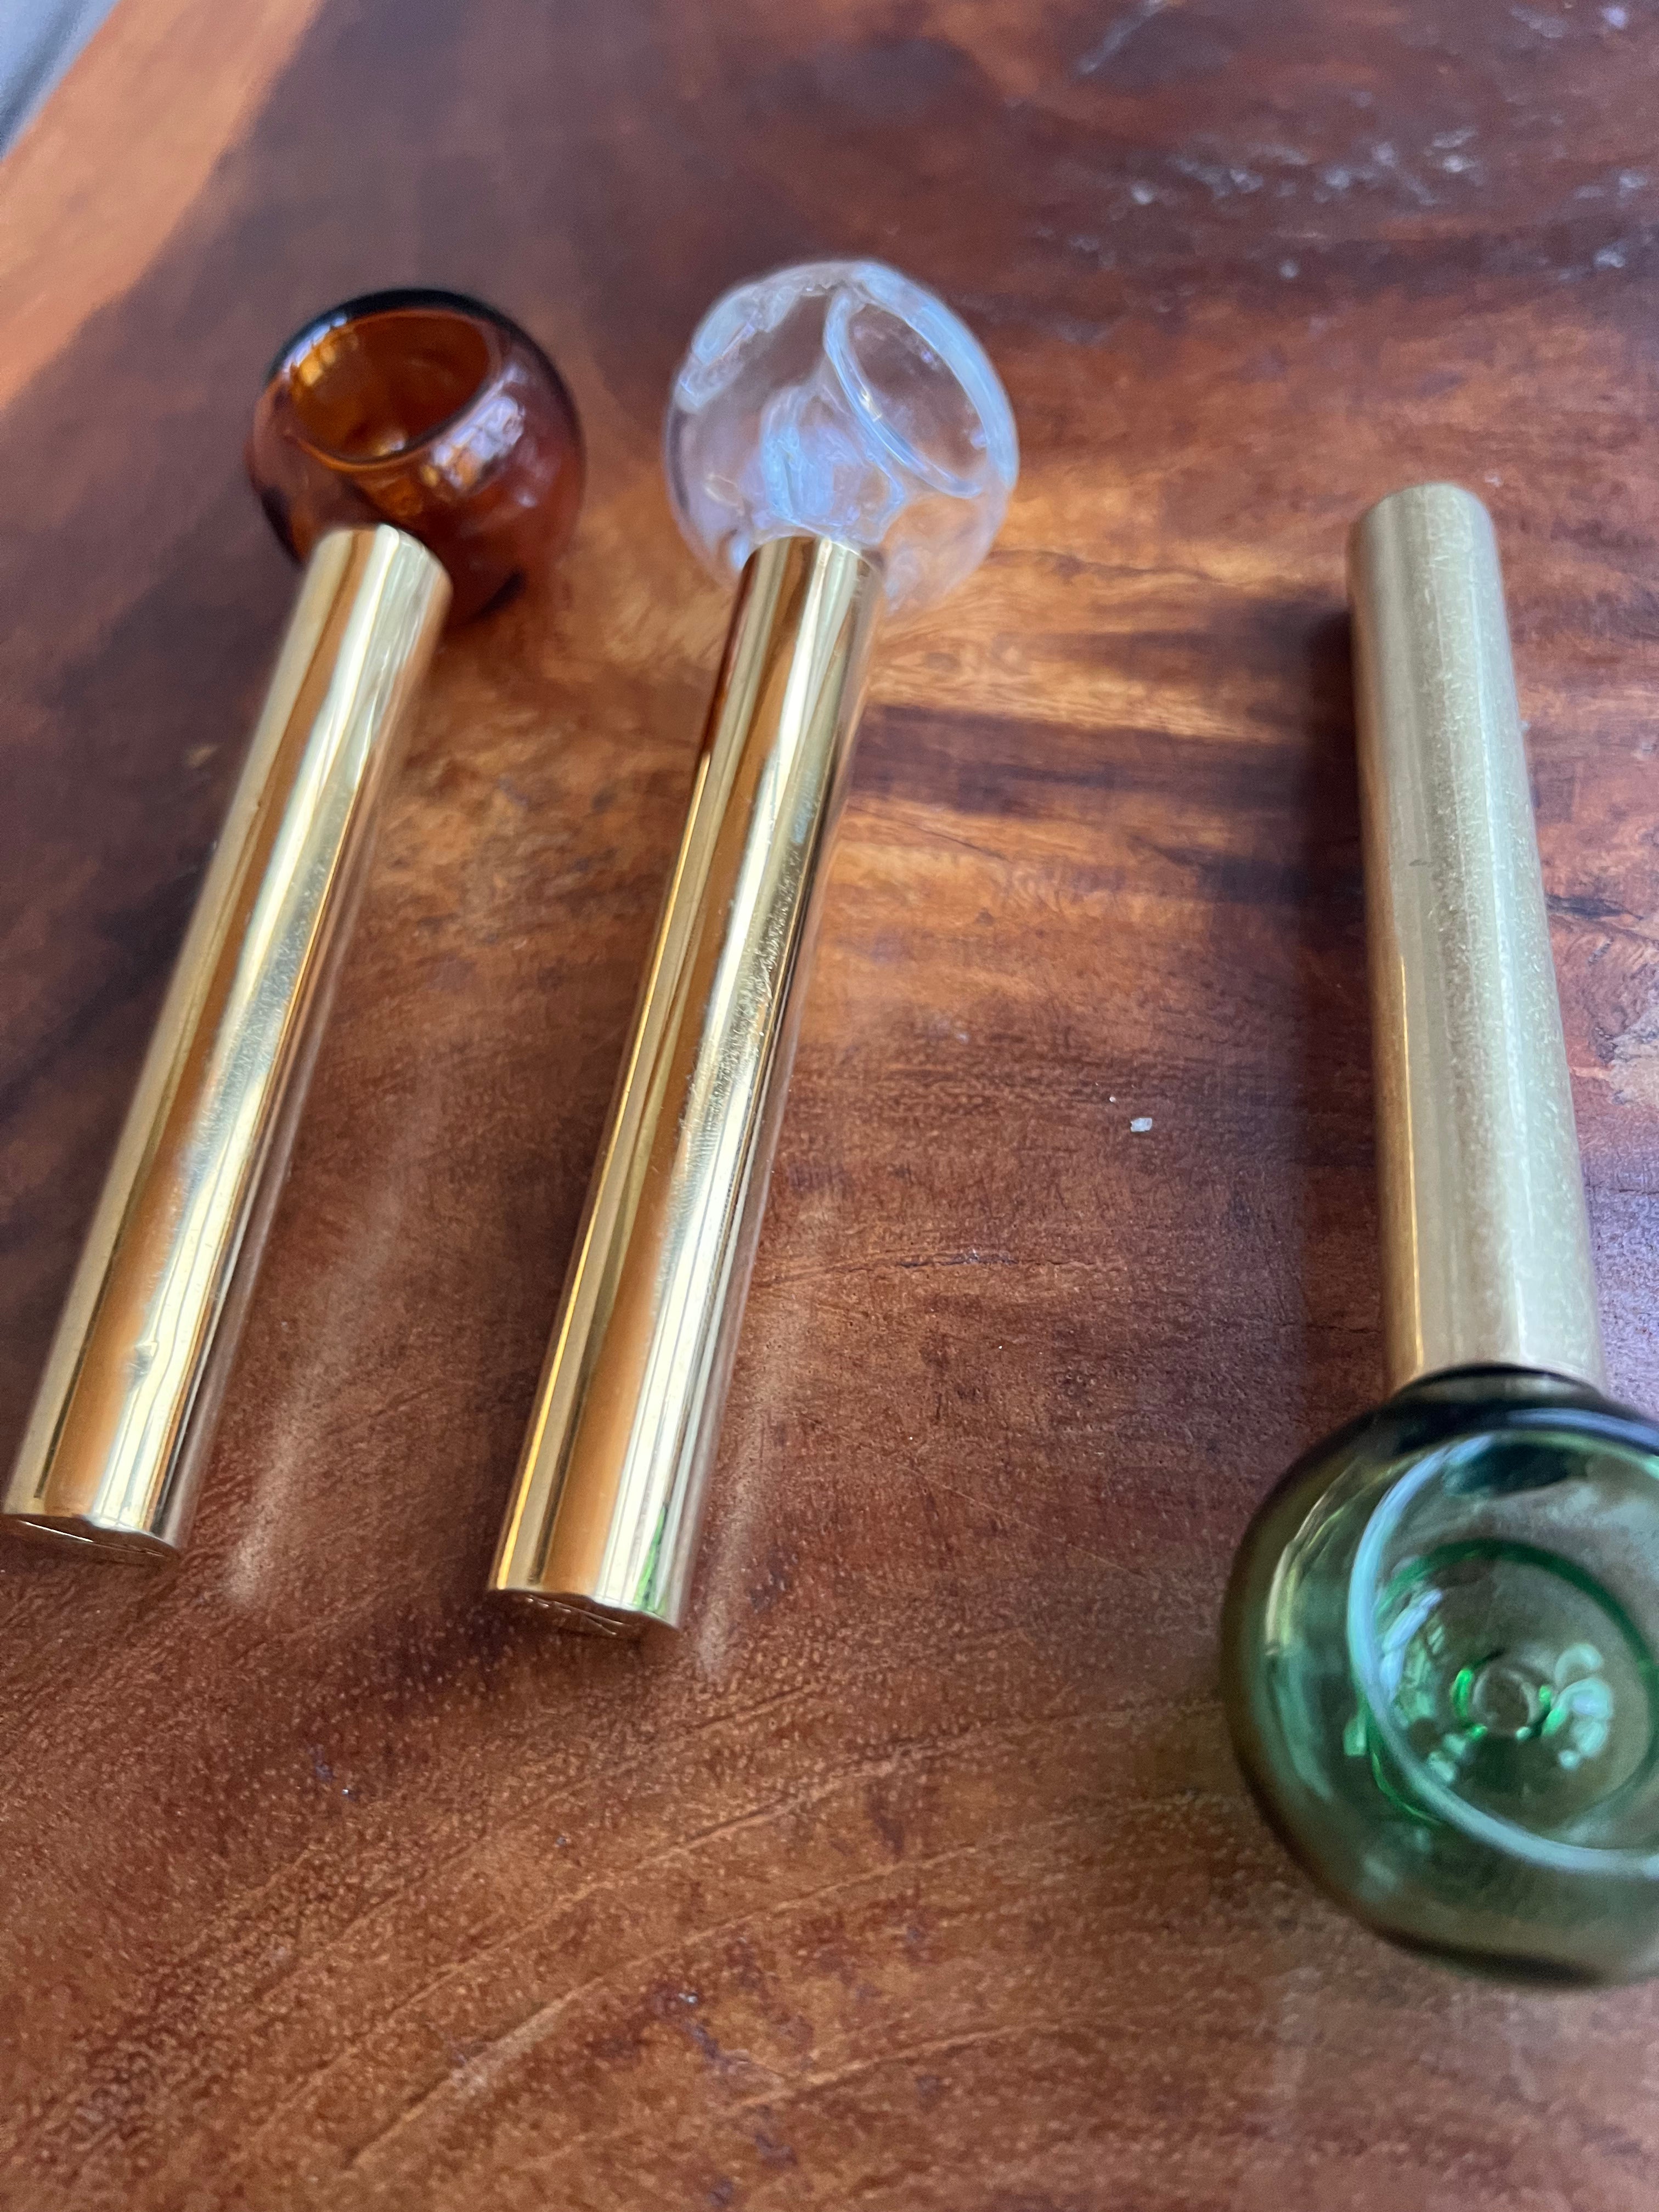 LIMITED EDITION BOWL PIPES